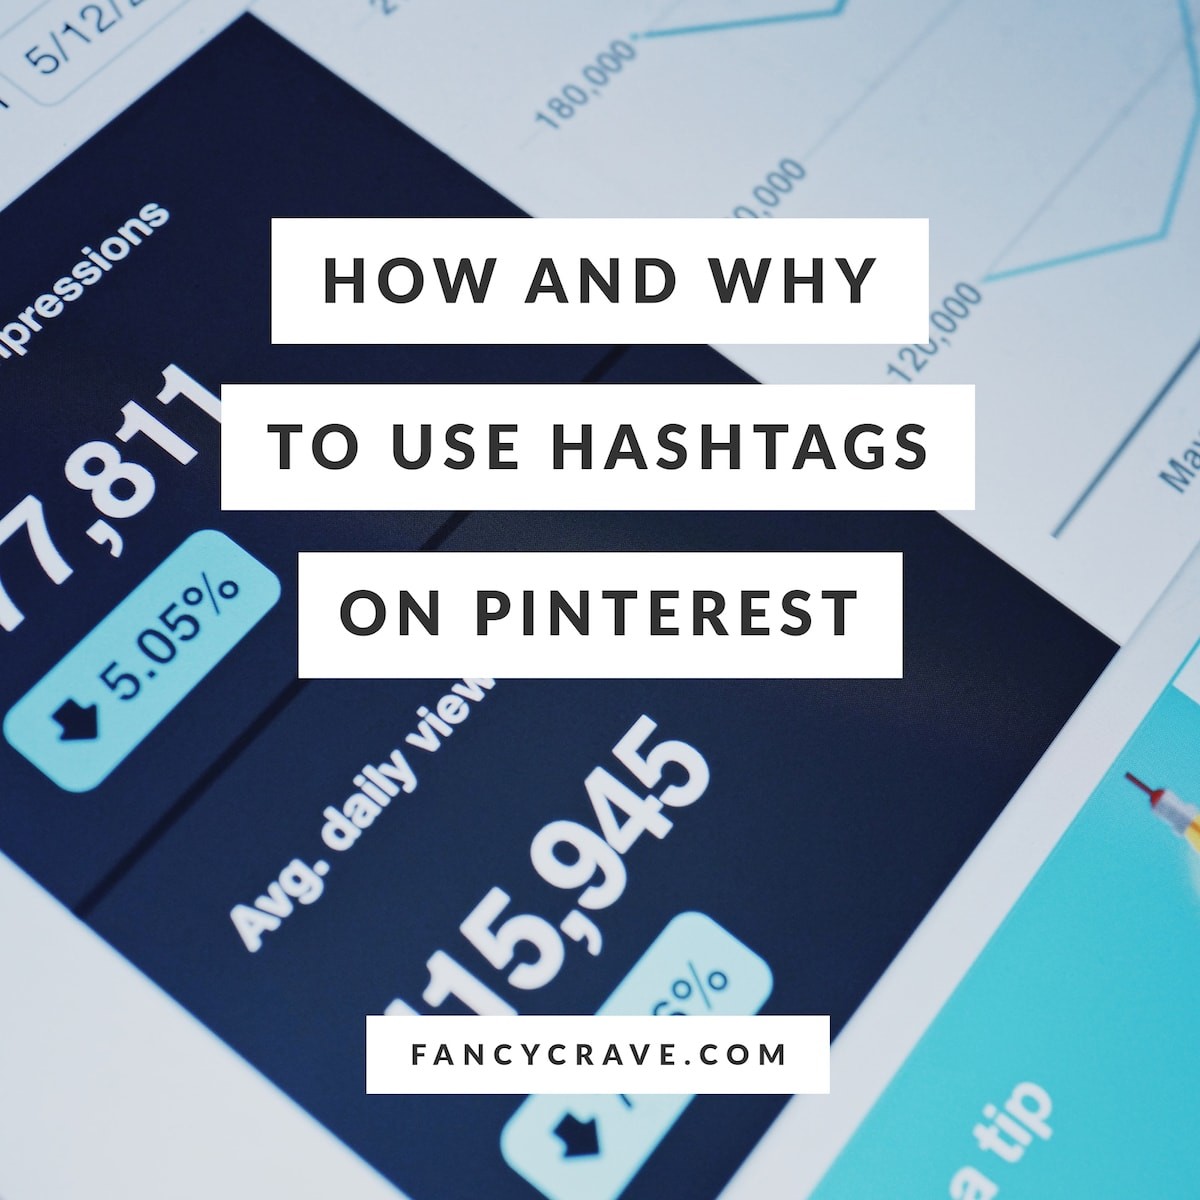 How and Why to Use Hashtags on Pinterest